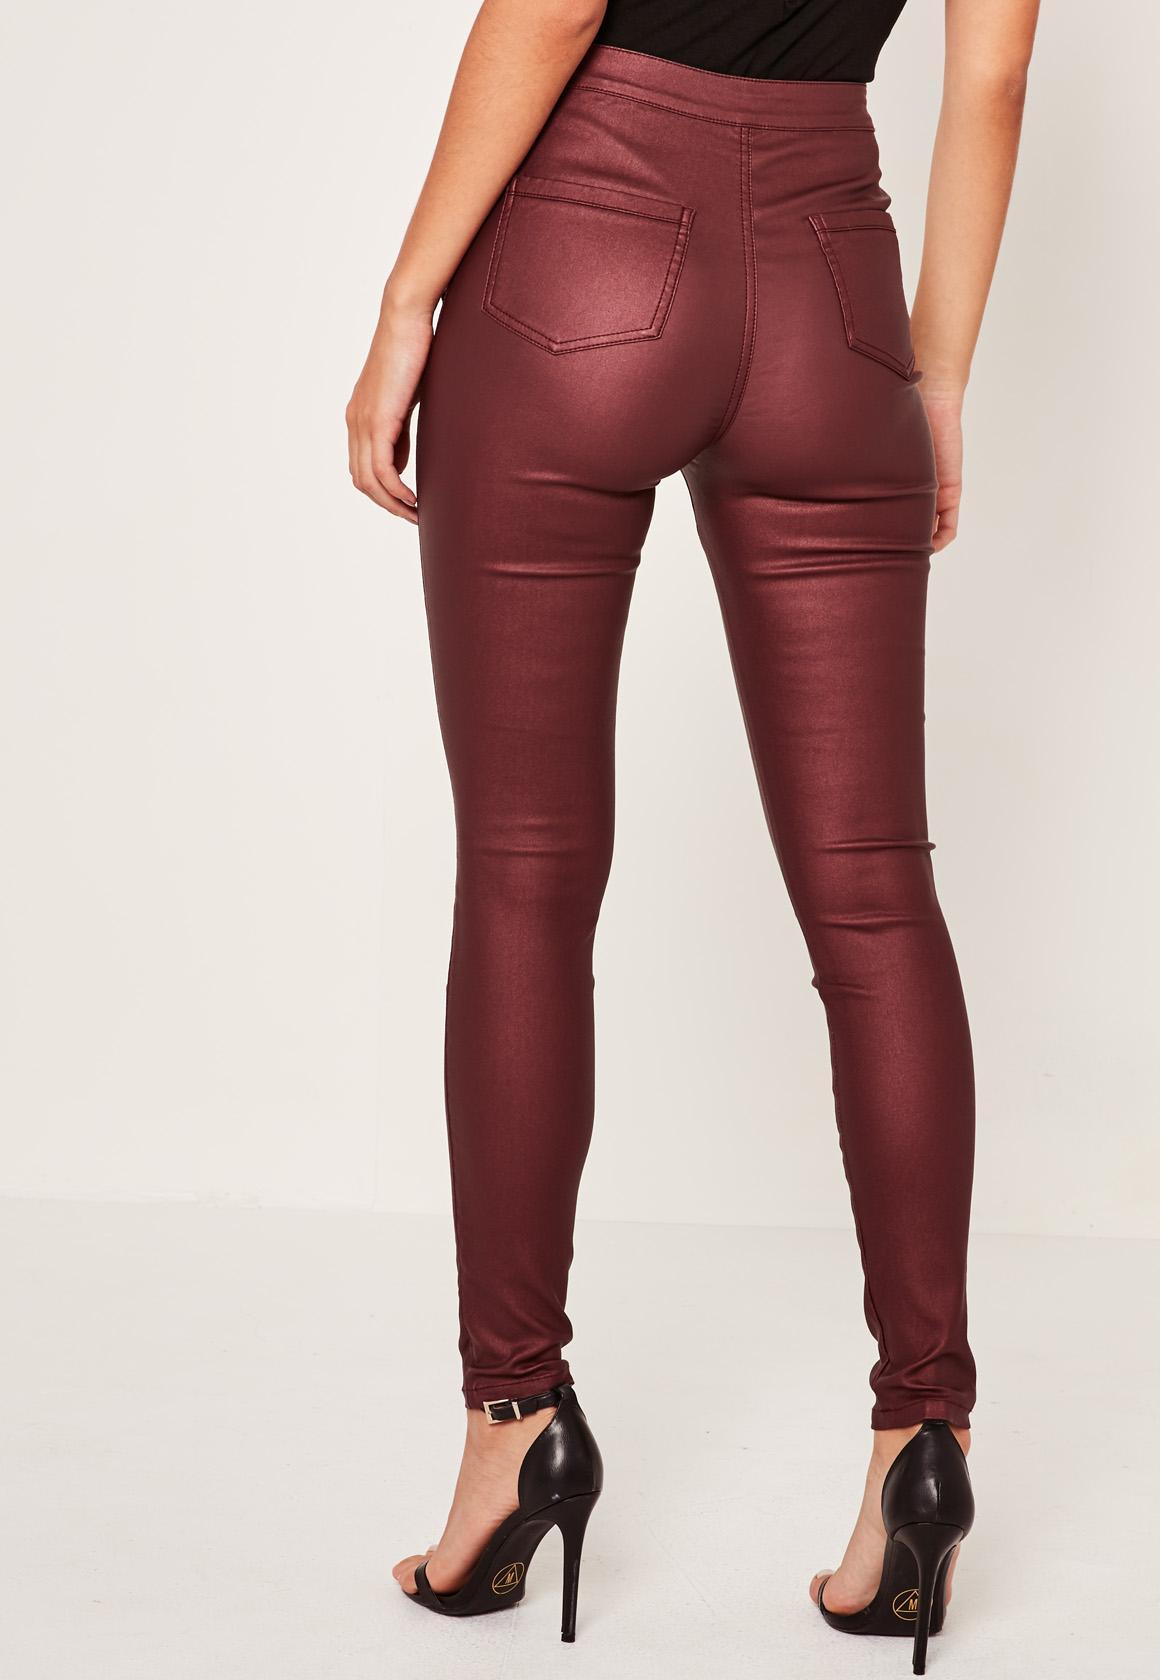 Missguided Denim Vice High Waisted Coated Skinny Jeans Burgundy in ...